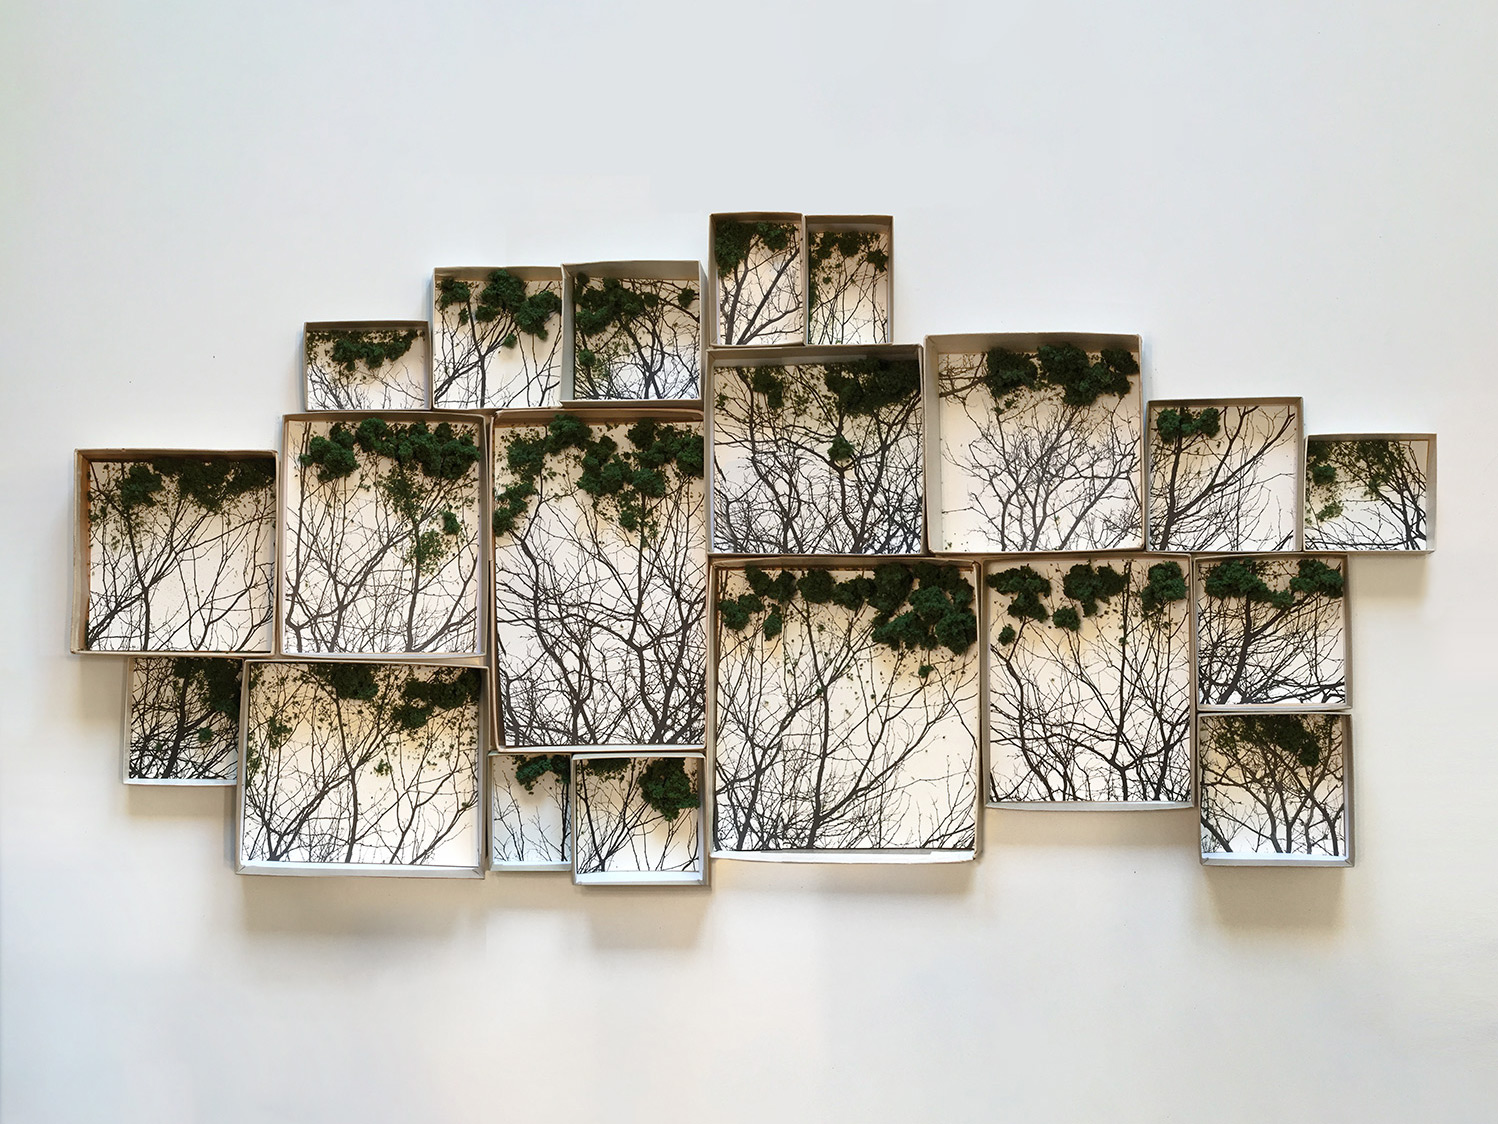 Untitled. Archival pigment prints and model railroad foliage in cardboard jewelry boxes. 2013.